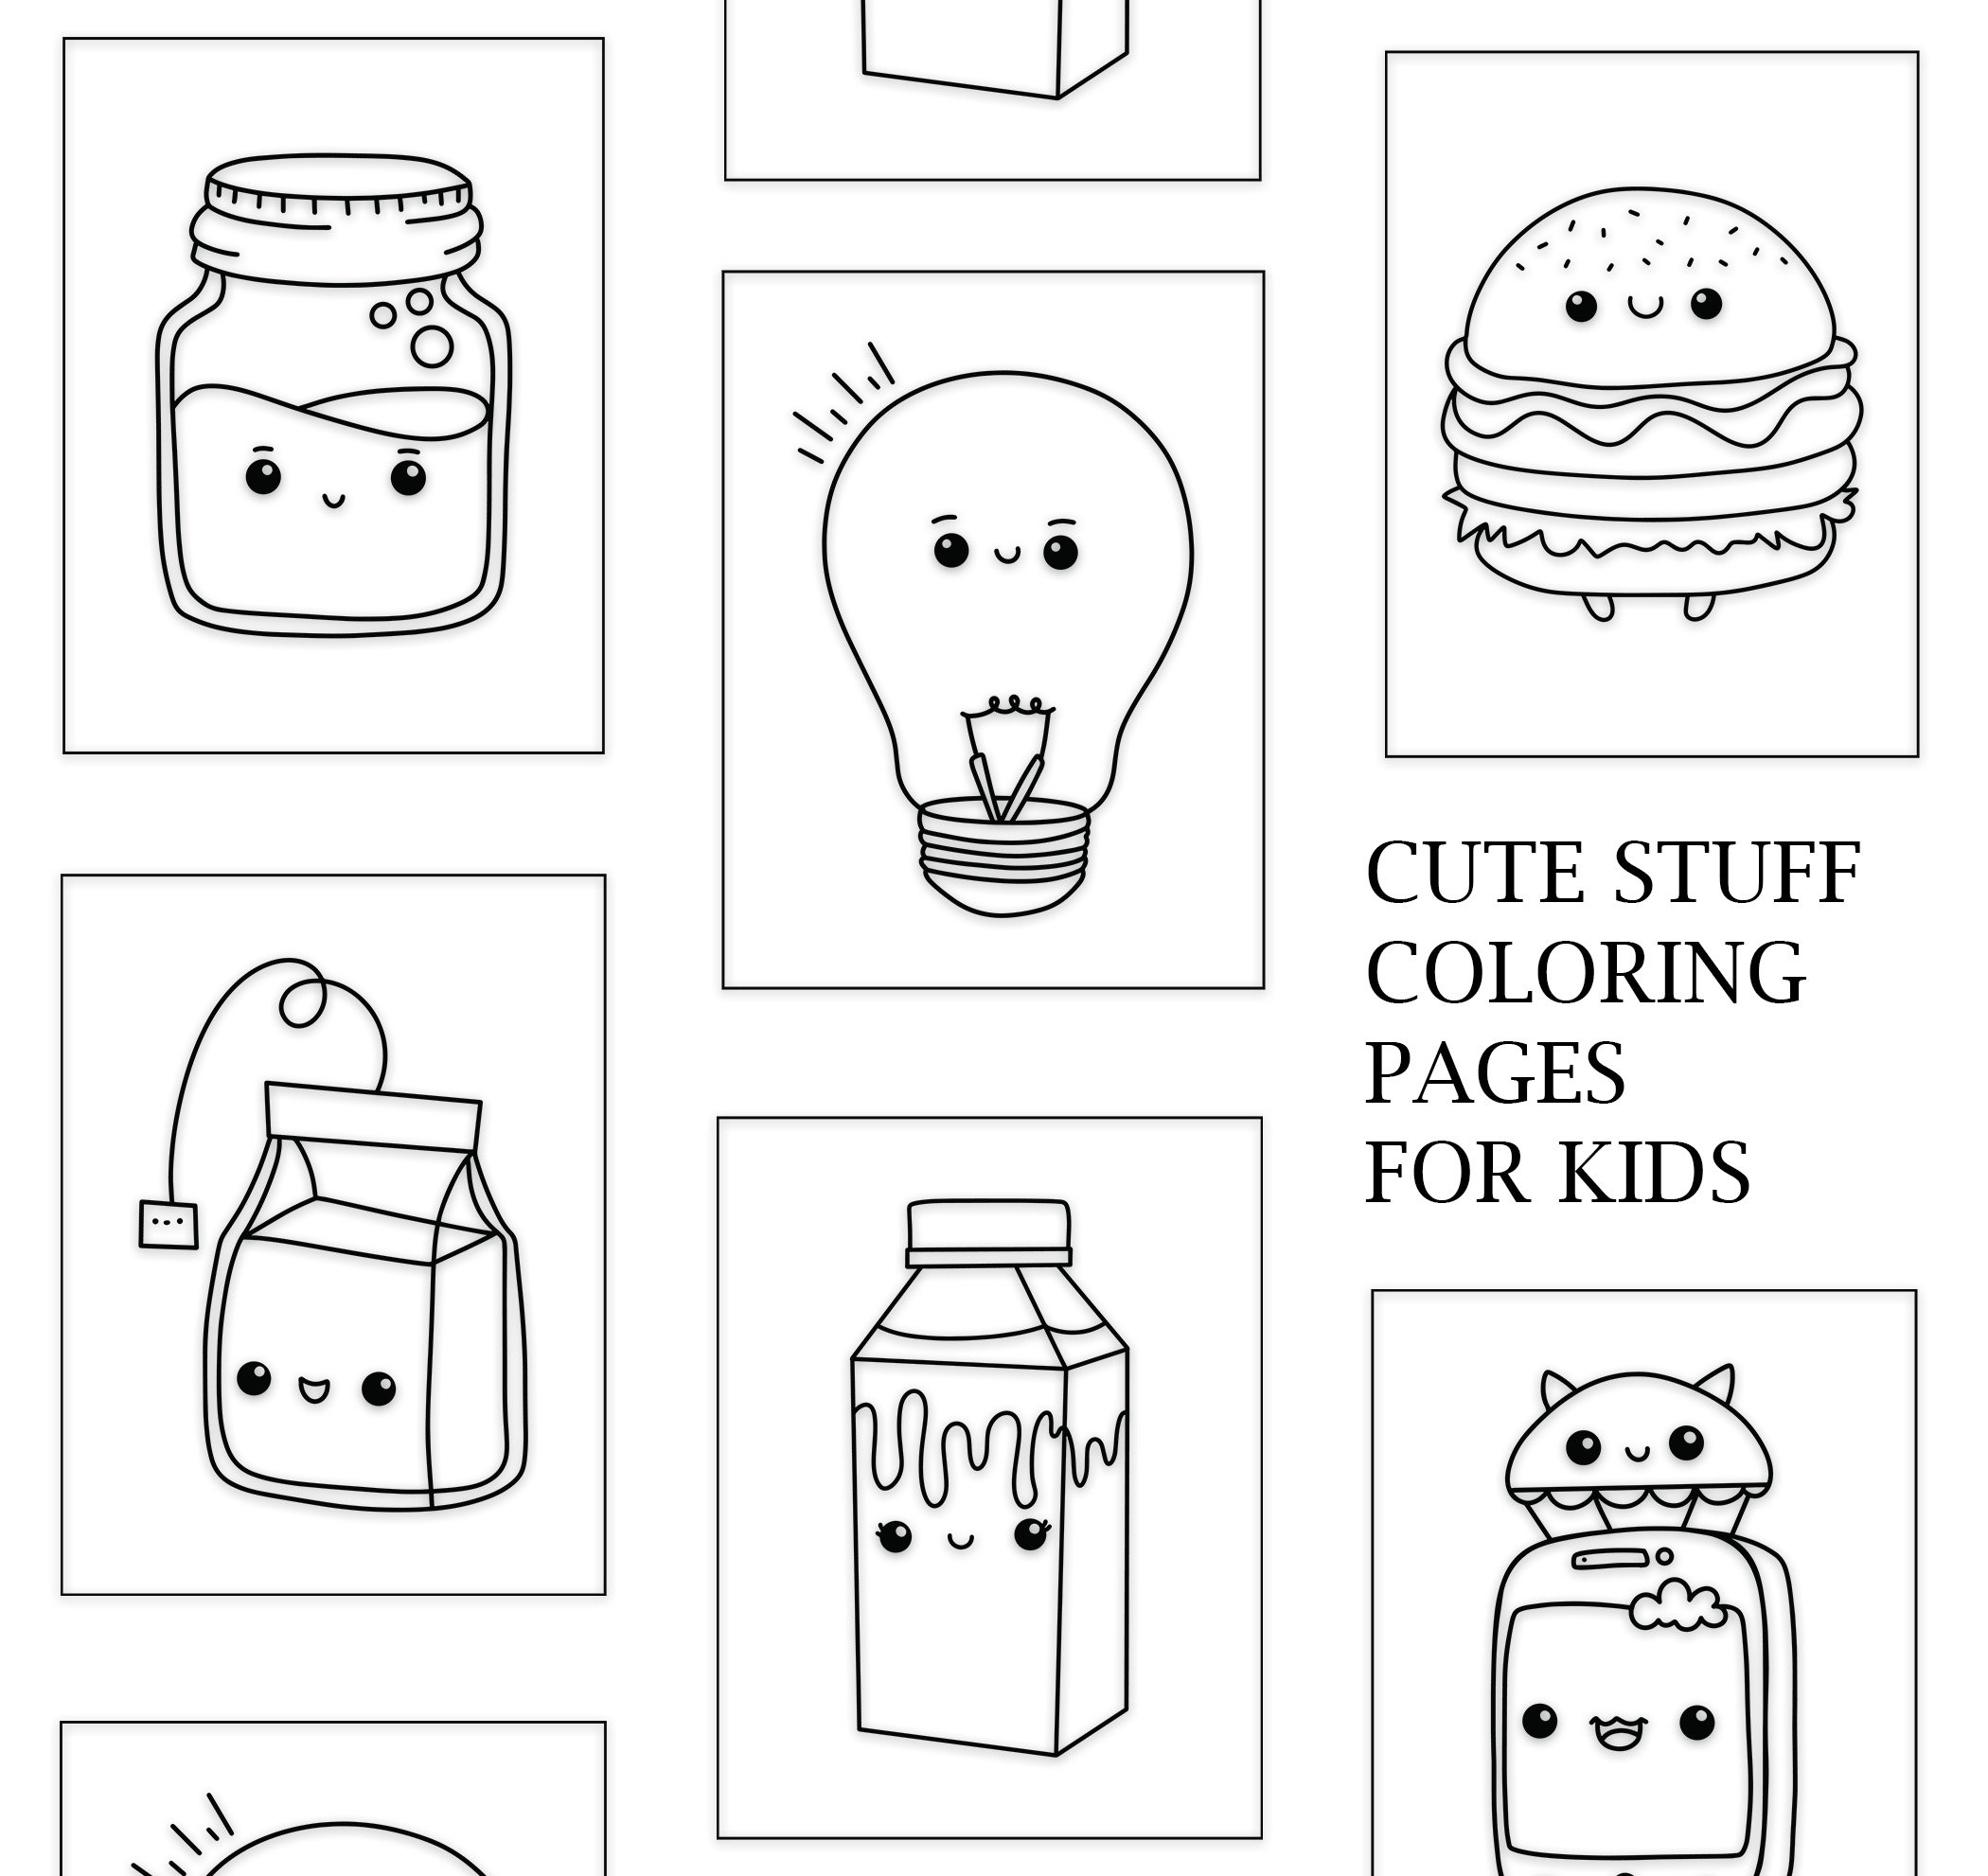 Cool stuff coloring pages kids printable coloring assessment cute stuff coloring activities coloring page instant digital download instant download